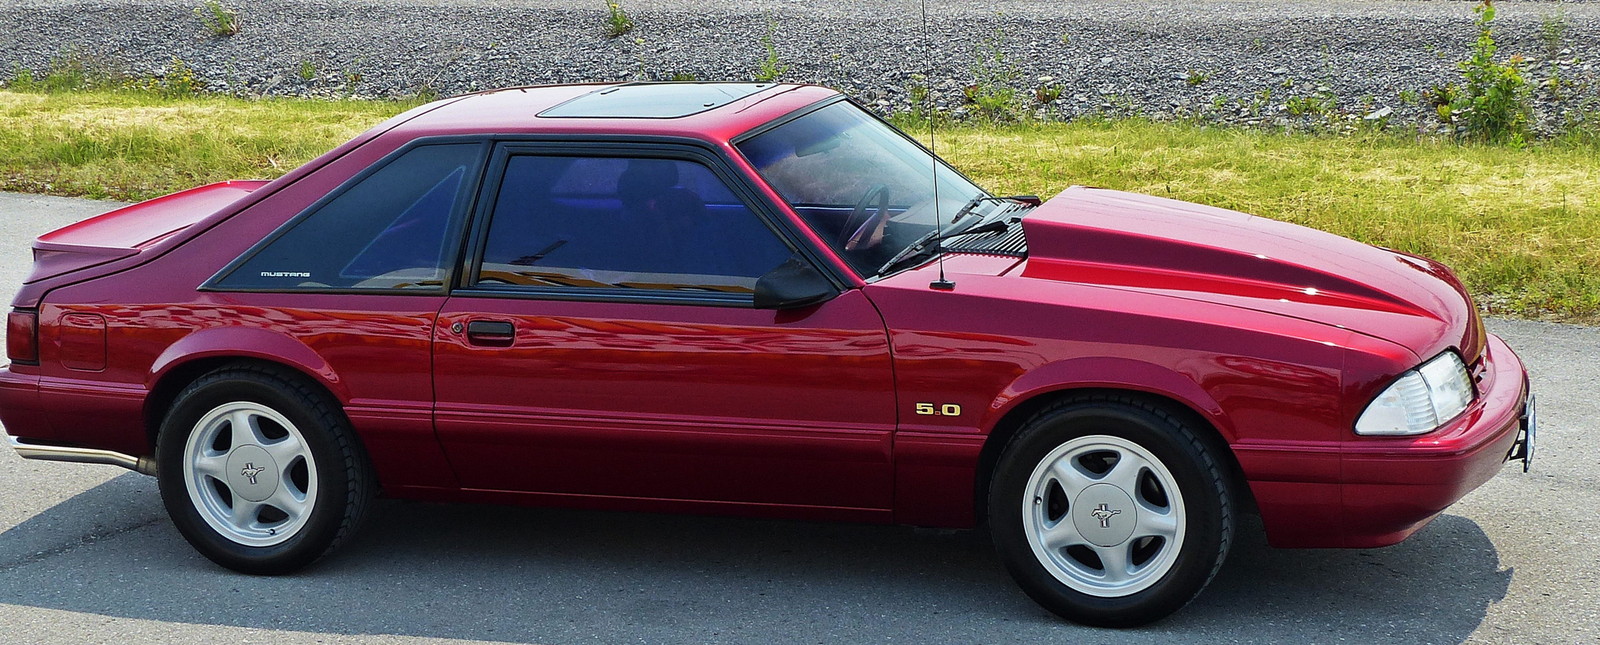 Deep Cherry 1993 Ford Mustang LX Hatchback